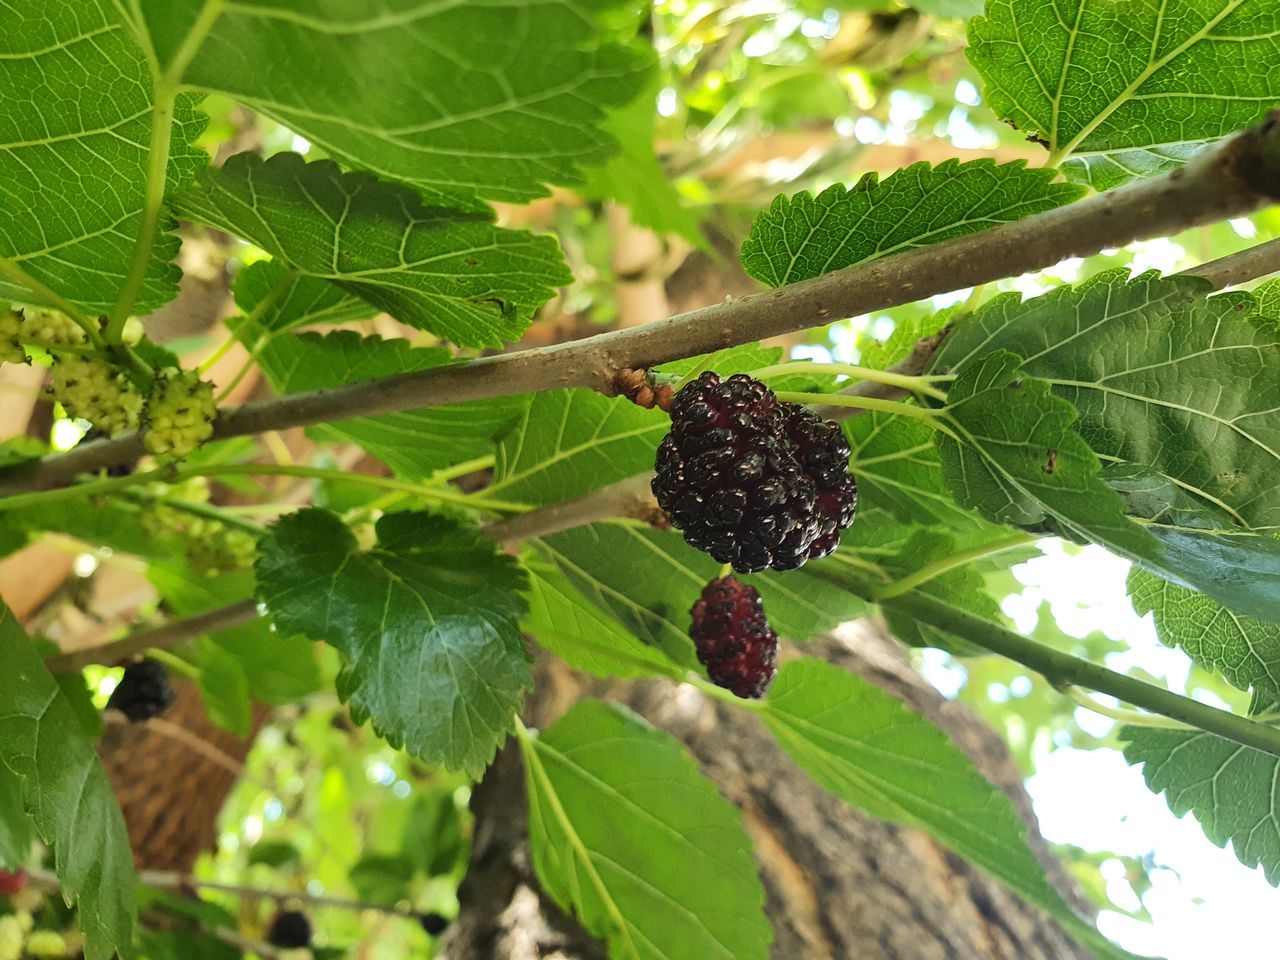 CLOSE-UP OF BERRIES GROWING ON TREE